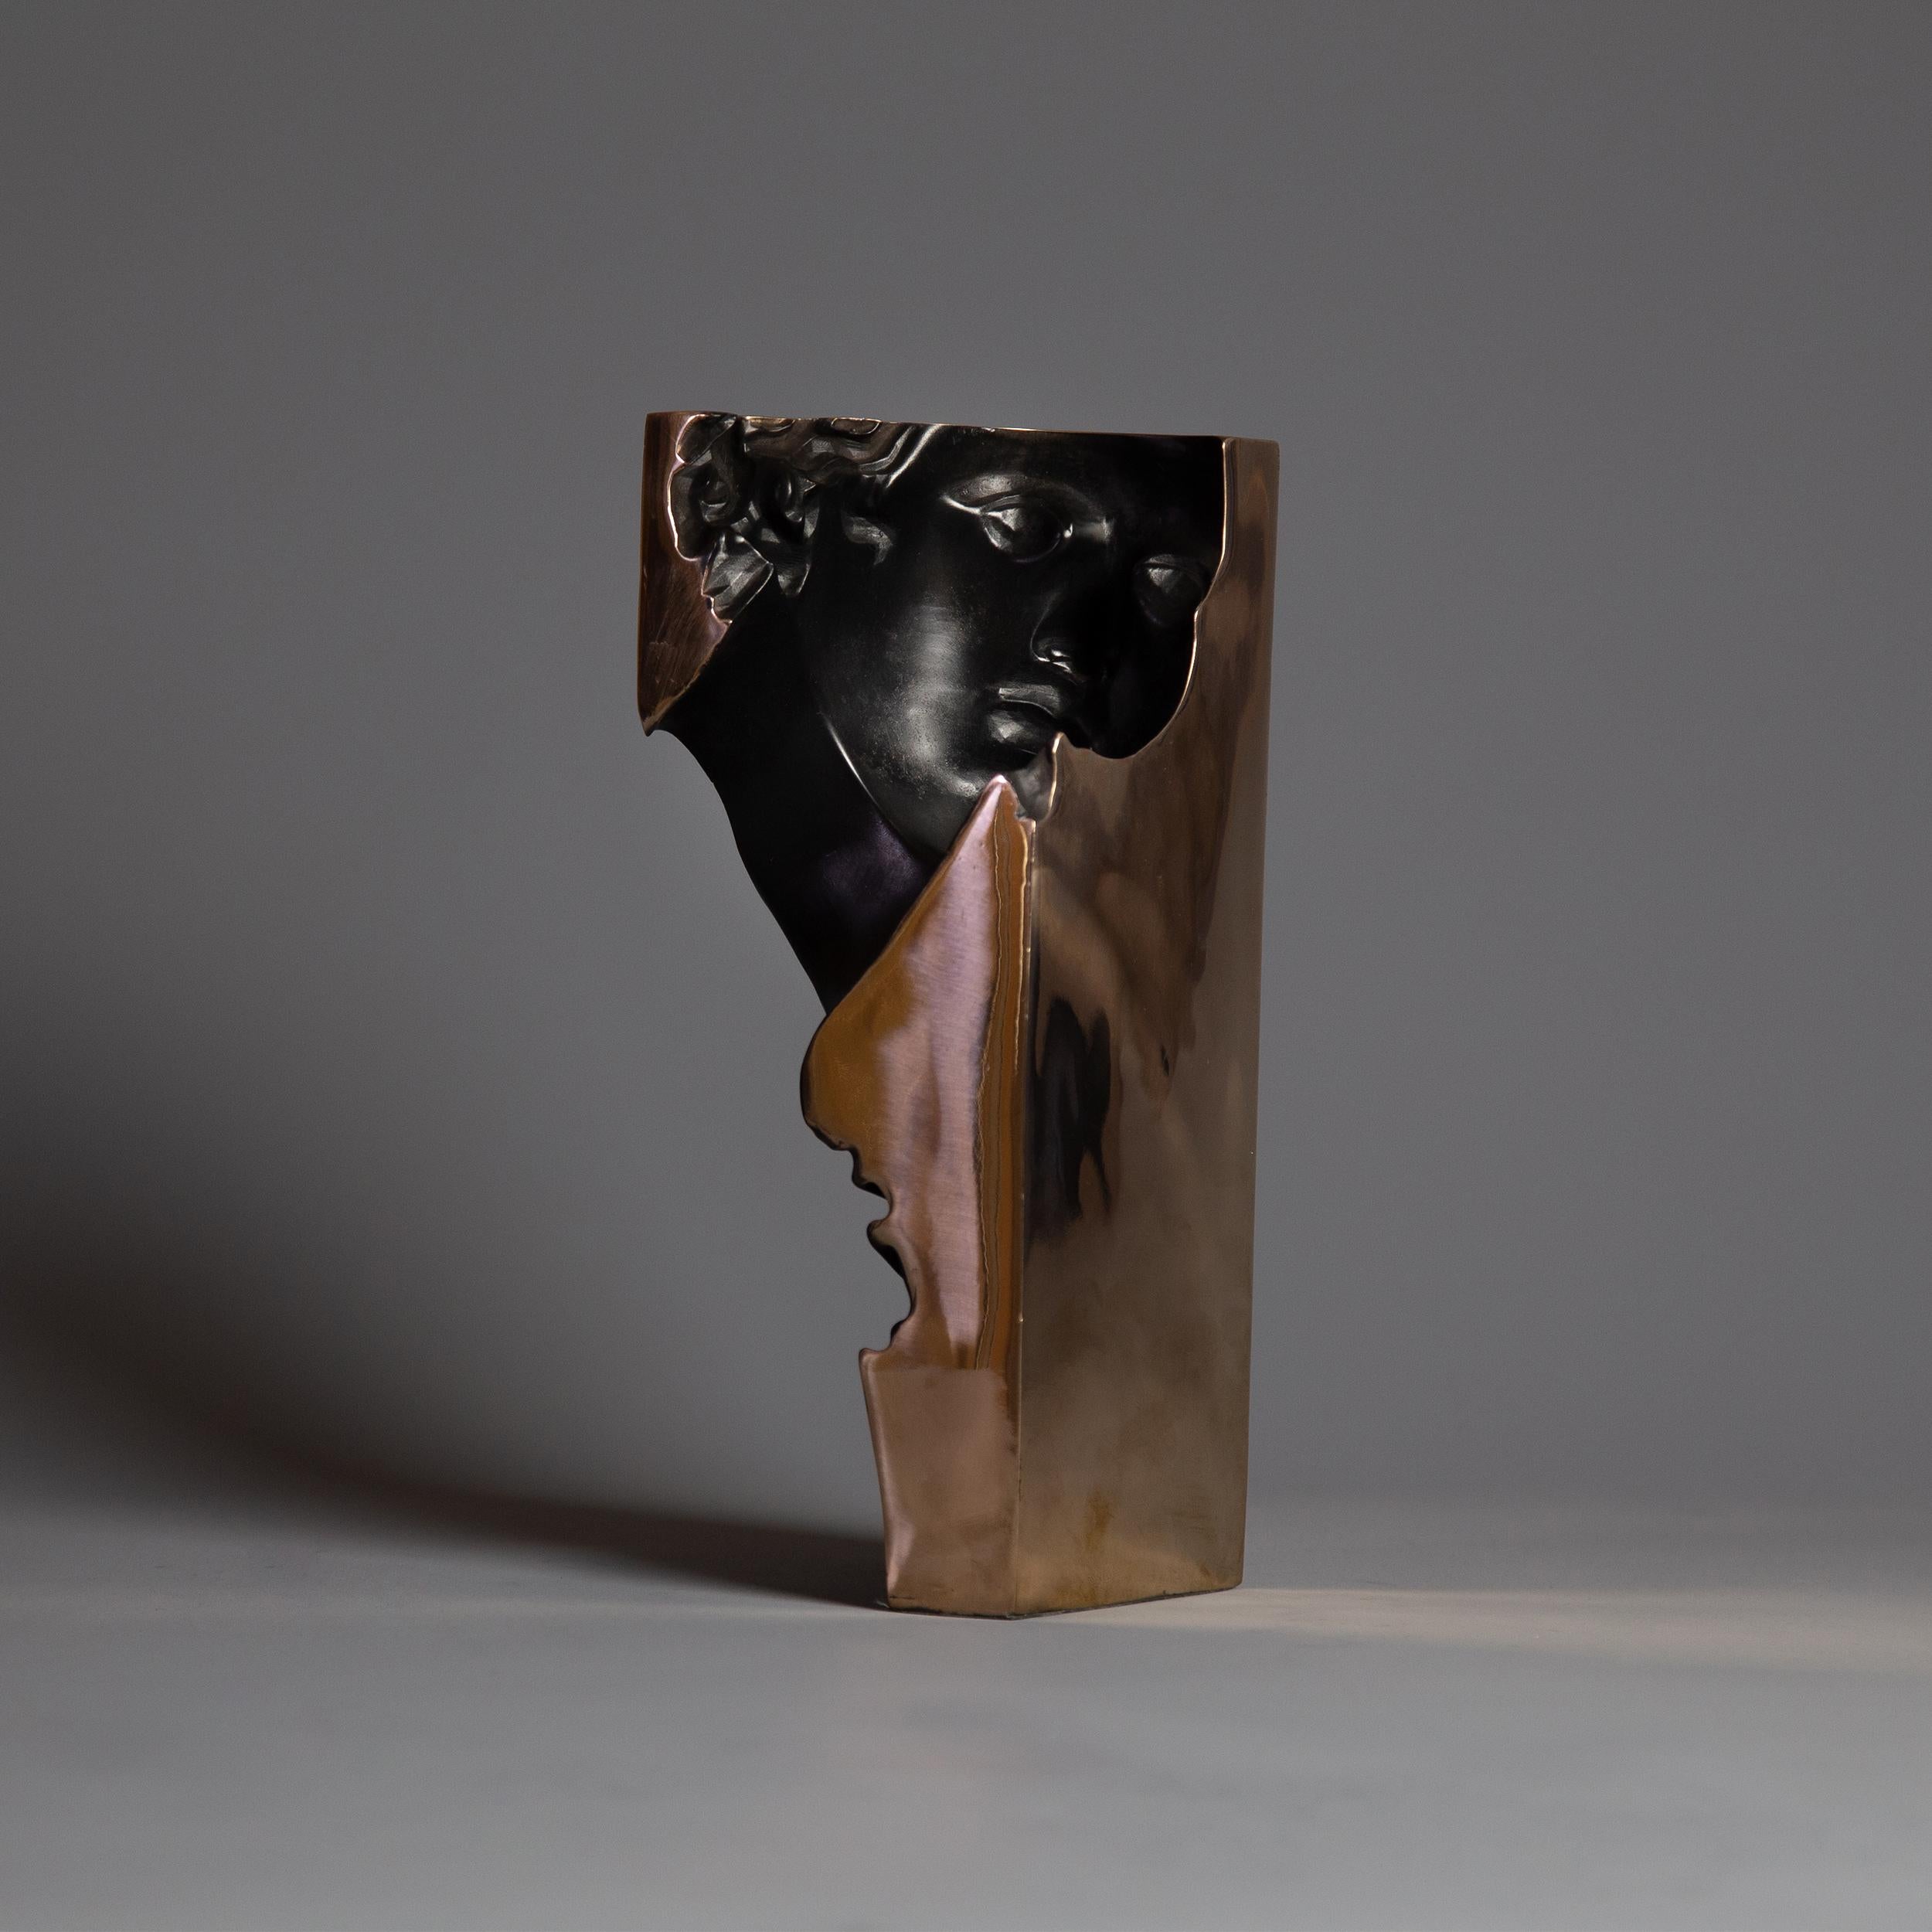 SHE, Limited Edition Hand-processed bronze sculpture, classic meets modern - Sculpture by Matteo Mauro